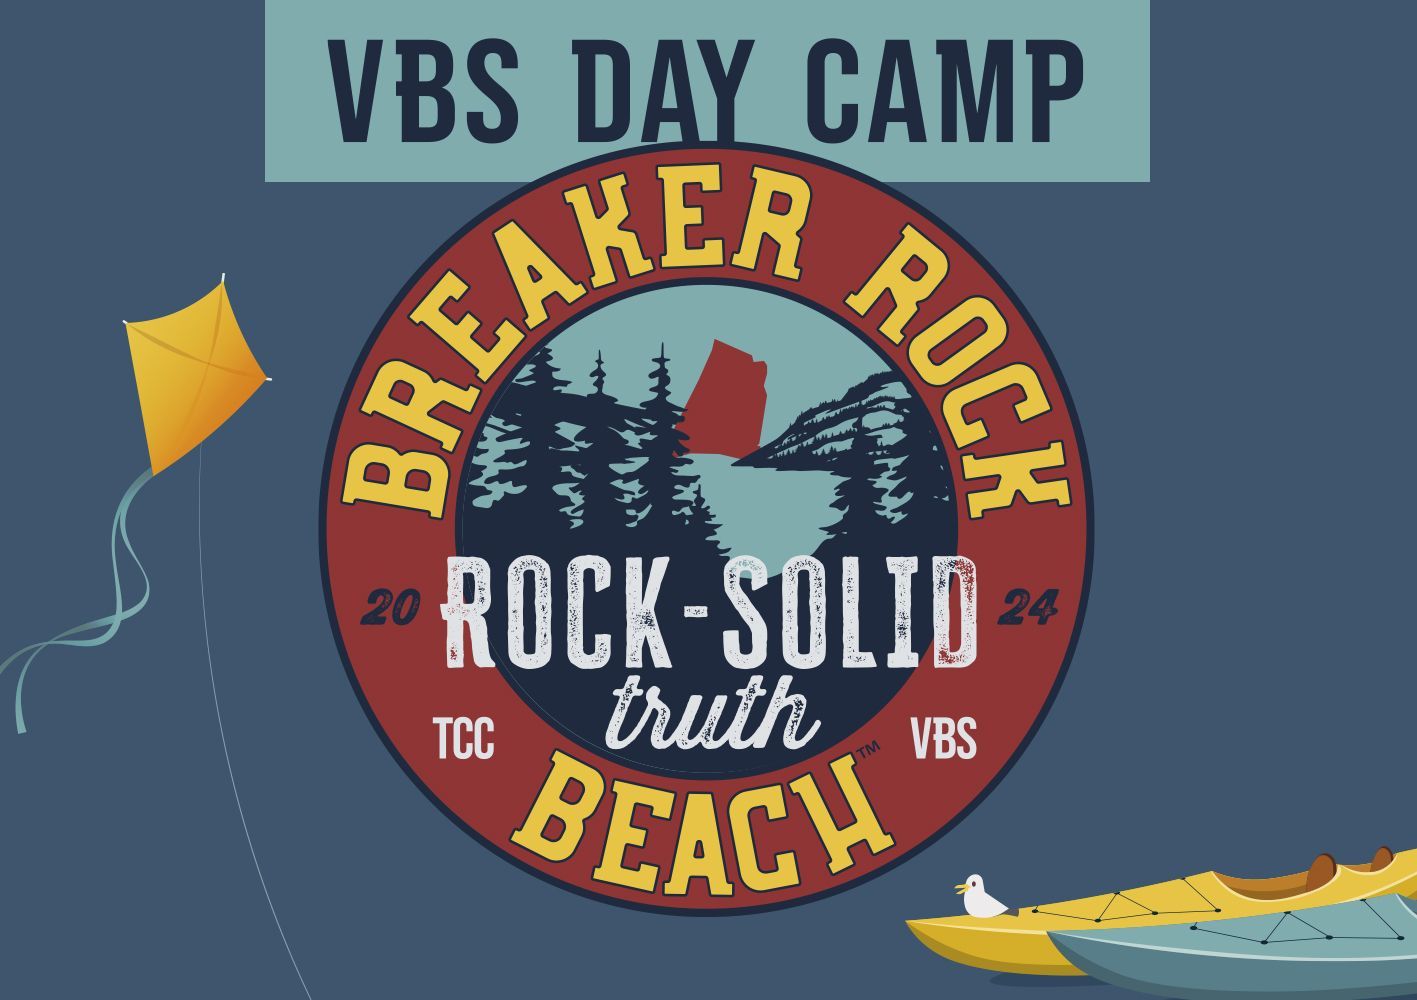 VBS DAY CAMP